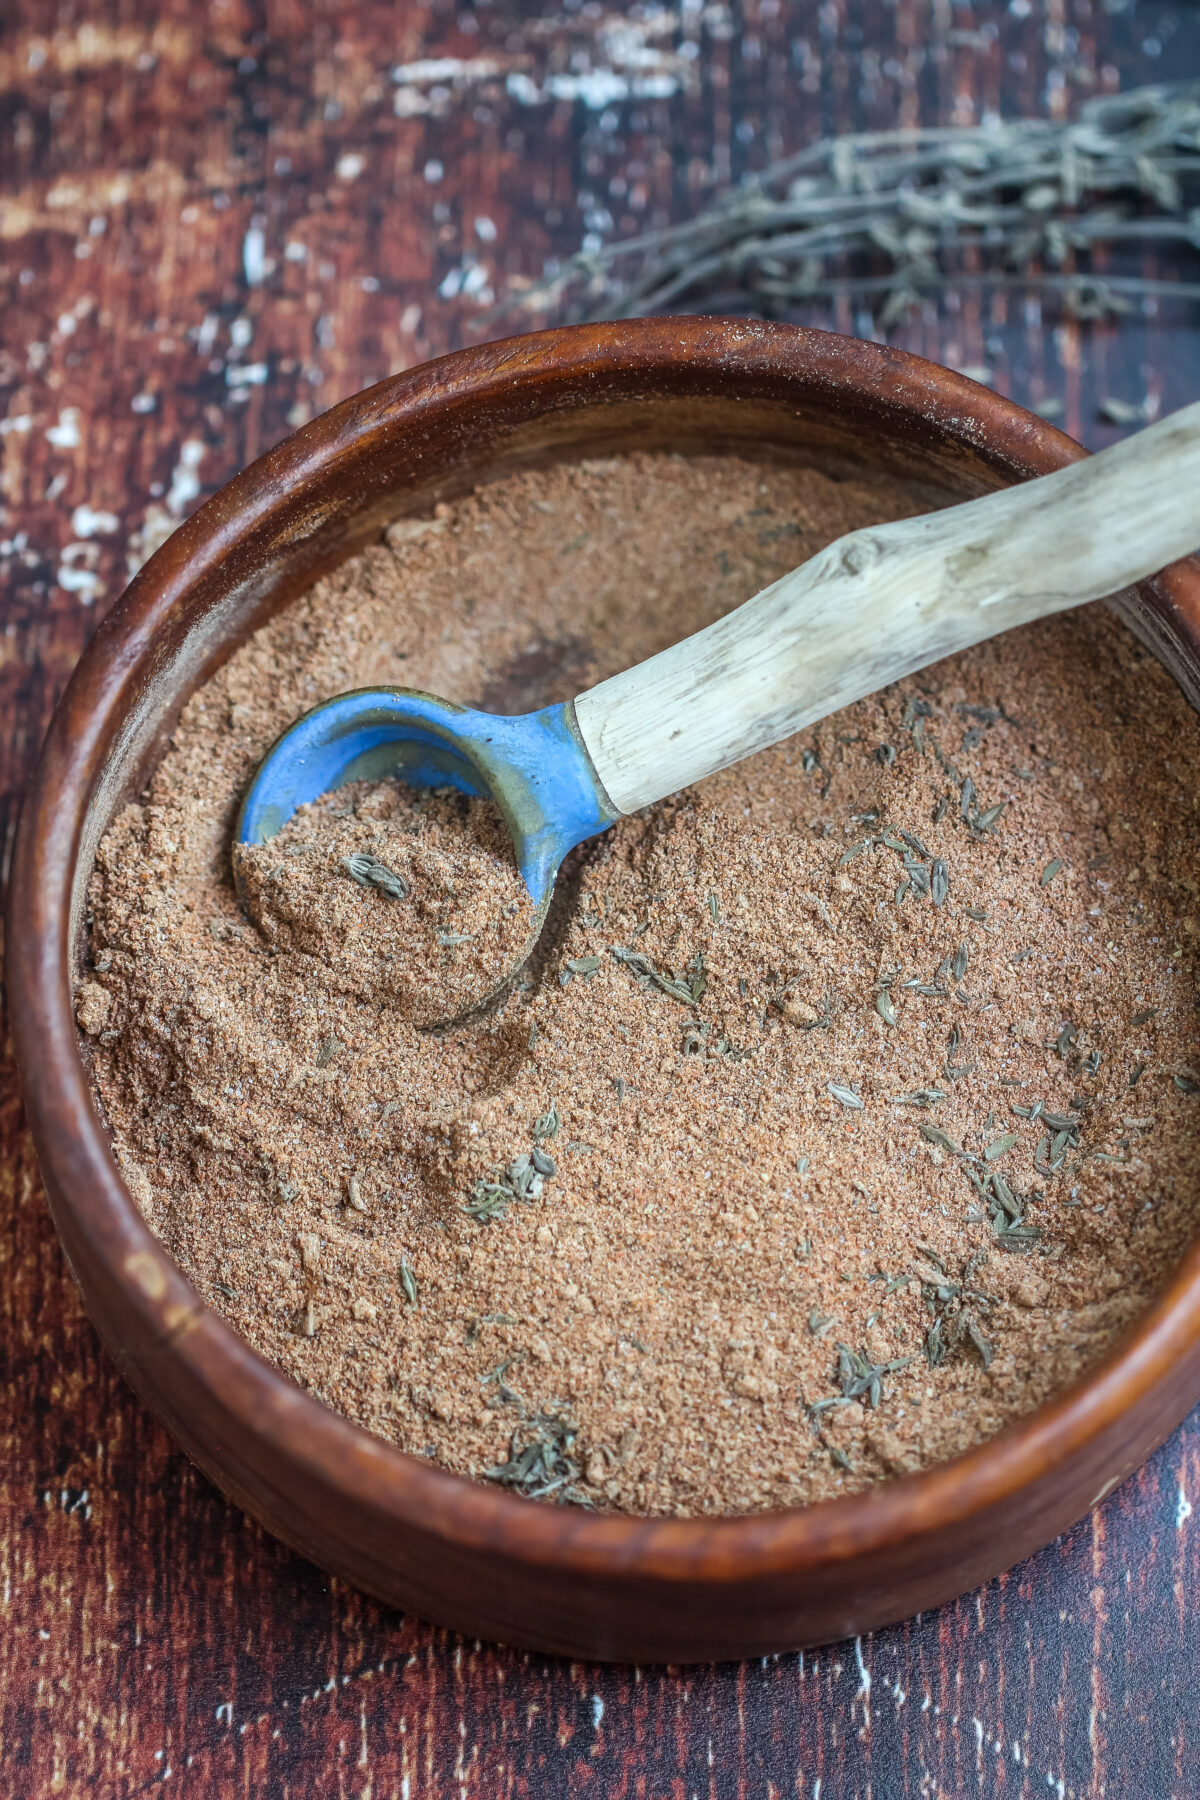 This Jamaican jerk seasoning recipe is a simple but tasty homemade recipe. Great to have on hand when you want that Island flavour!